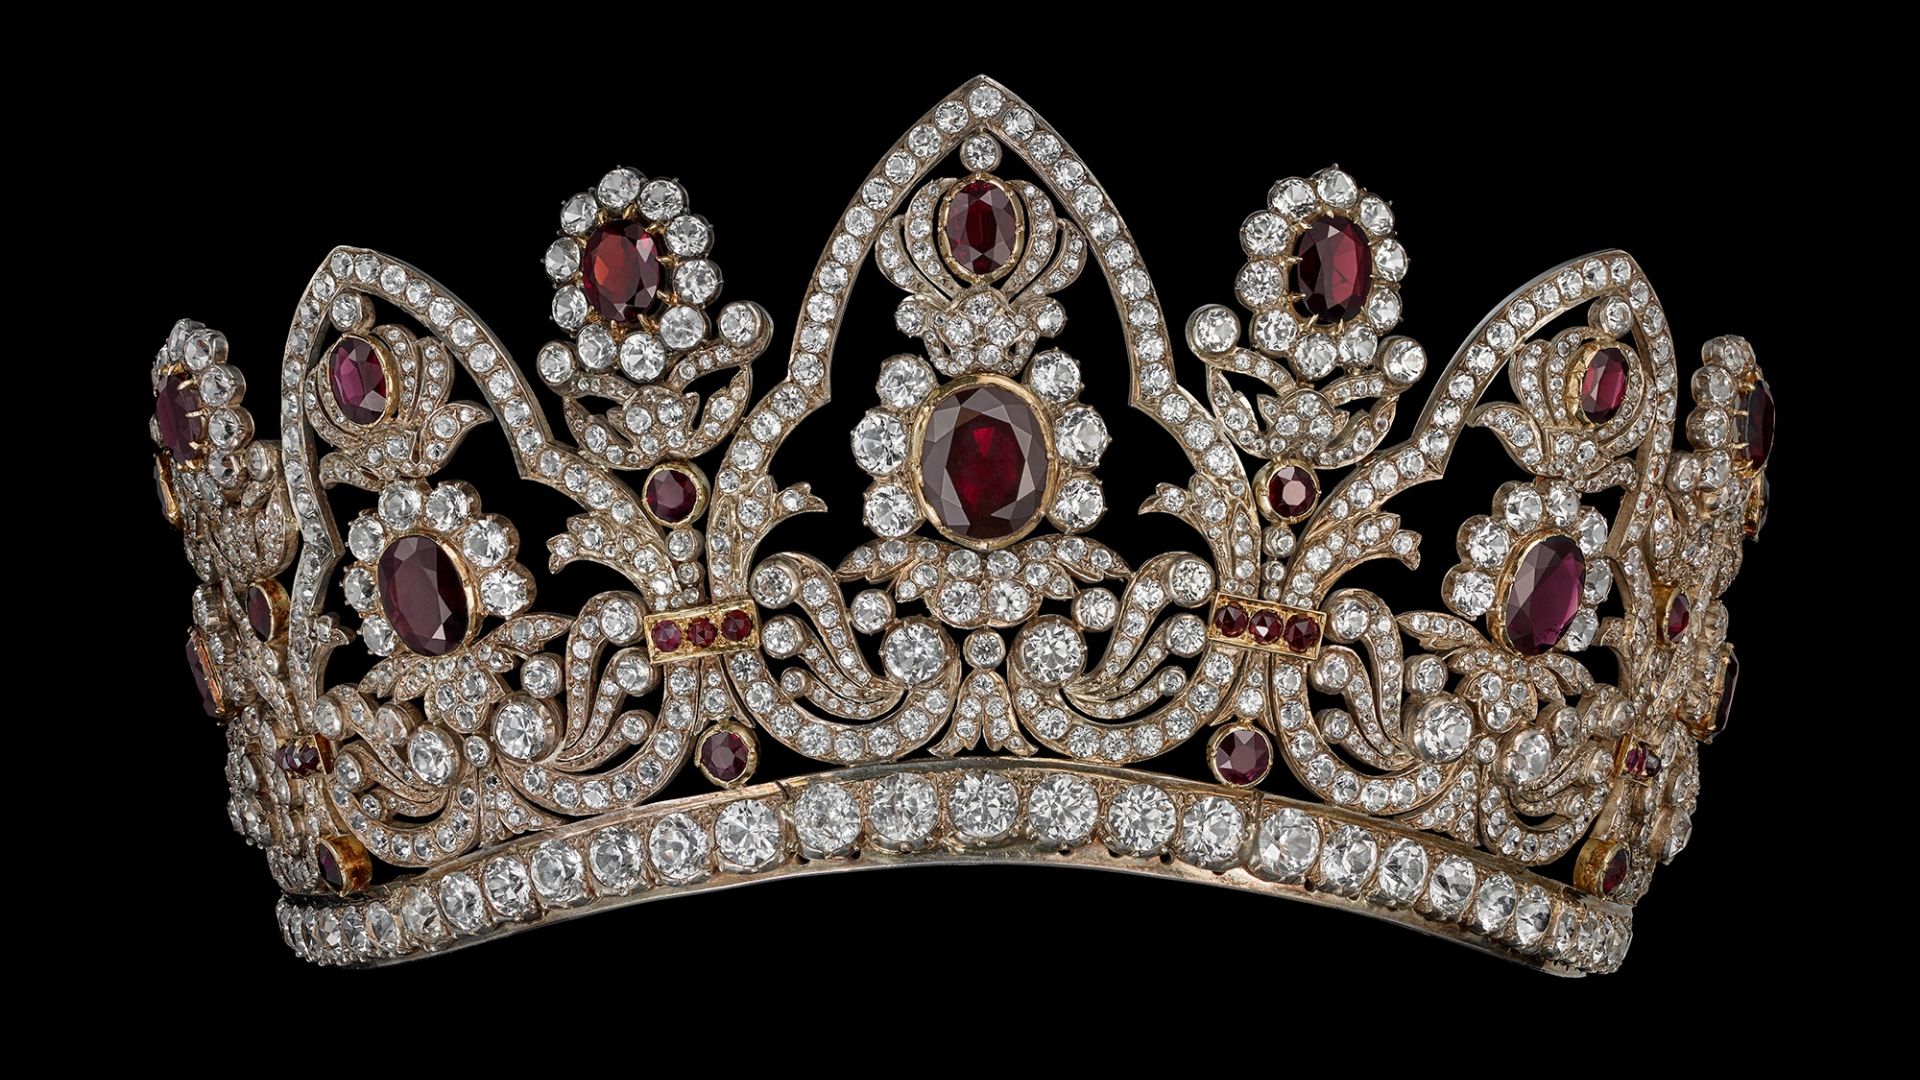 Chaumet In Majesty: A Journey Through The Crown's Jewels